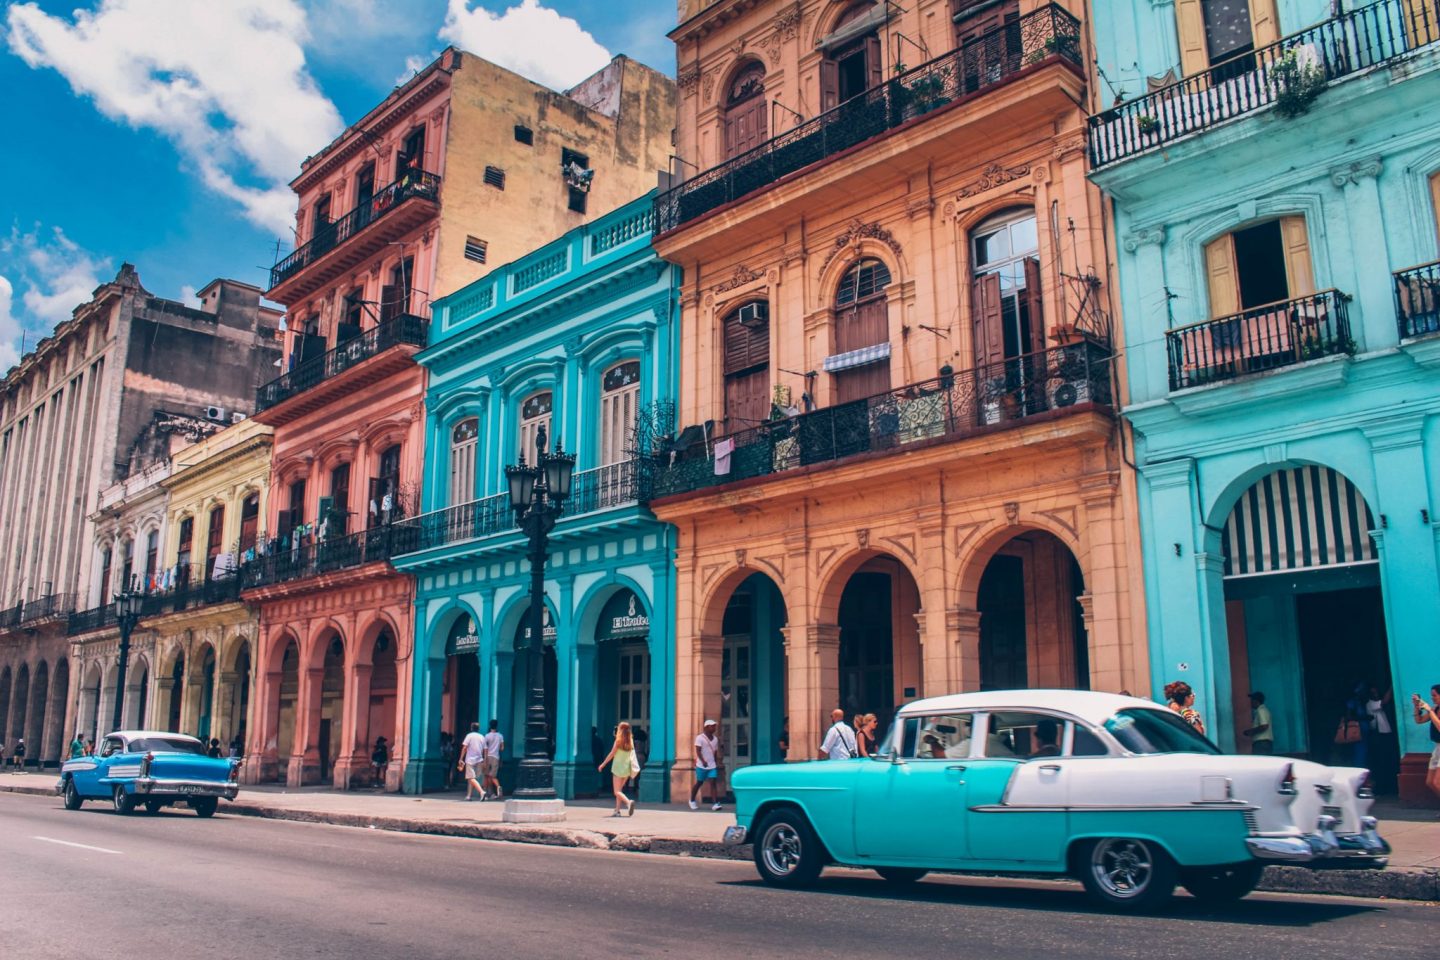 Havana, Cuba is one of the world's most colourful cities